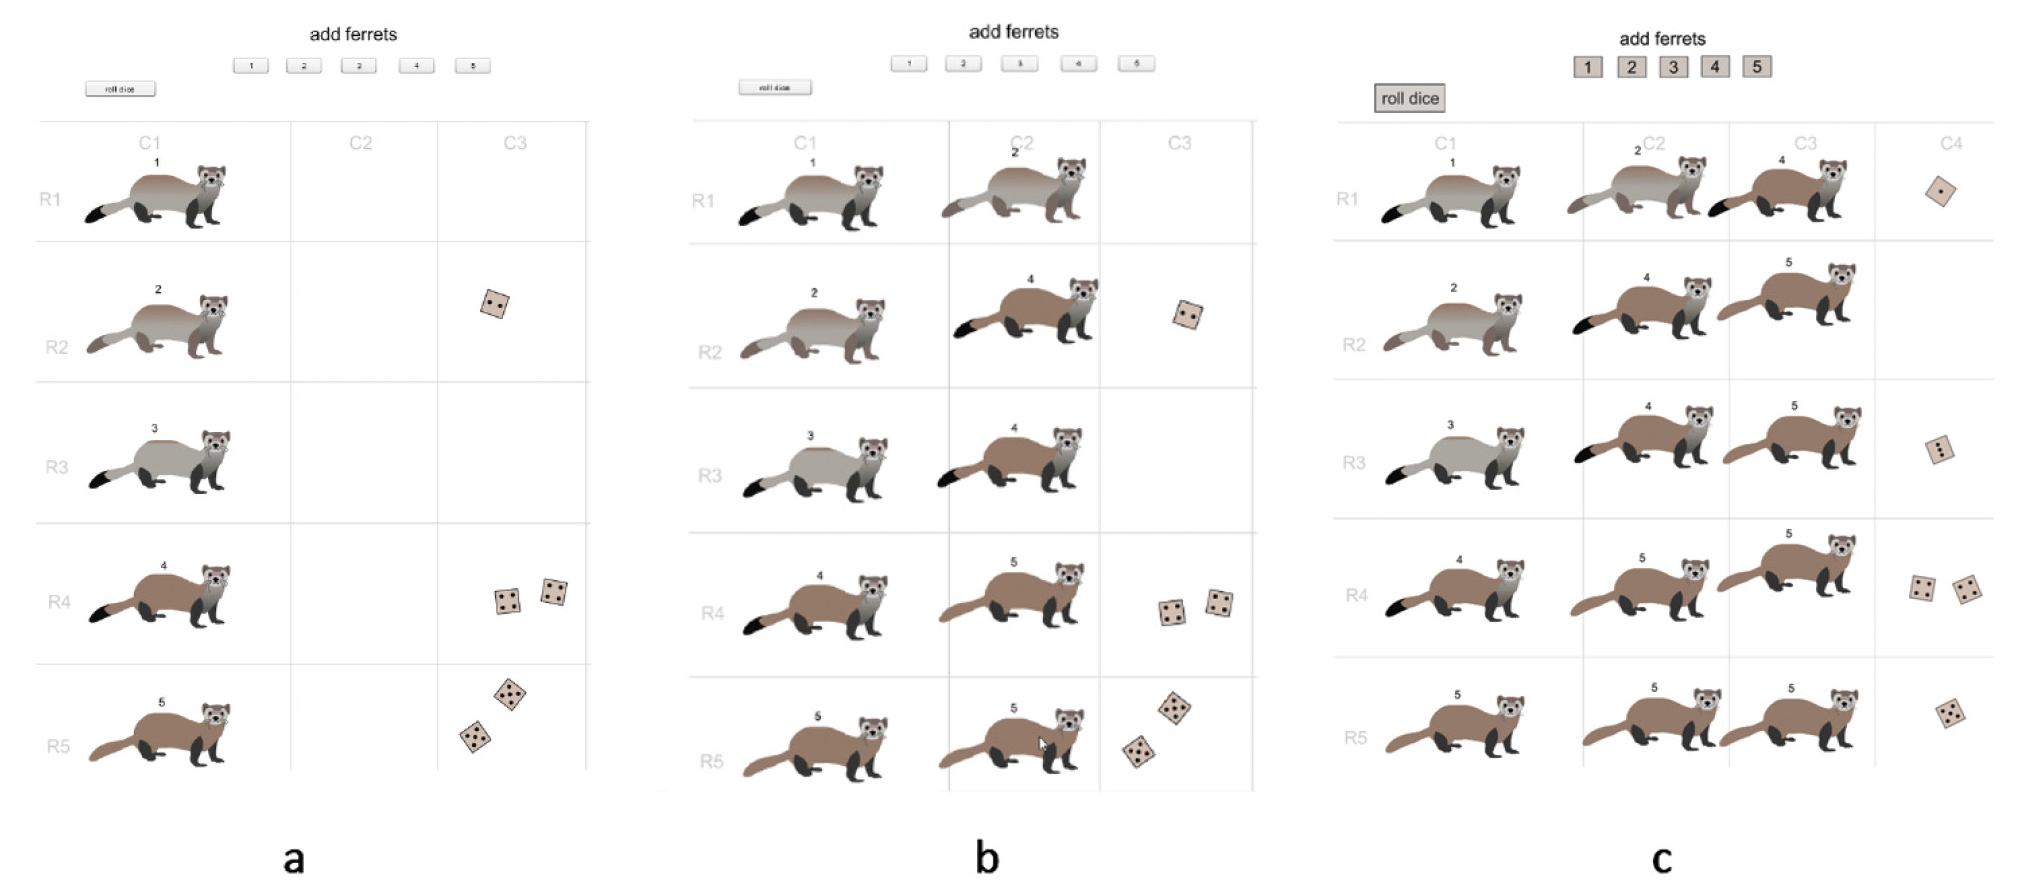 Figure 2a. Ferret two found in Column 1, Row 2 reproduced once, ferret four and five, C1, R4 and C1, R5 both reproduced twice. Figure 2b offspring were moved to C2. C2 ferrets reproduced and were moved to C3 Figure 2c. 